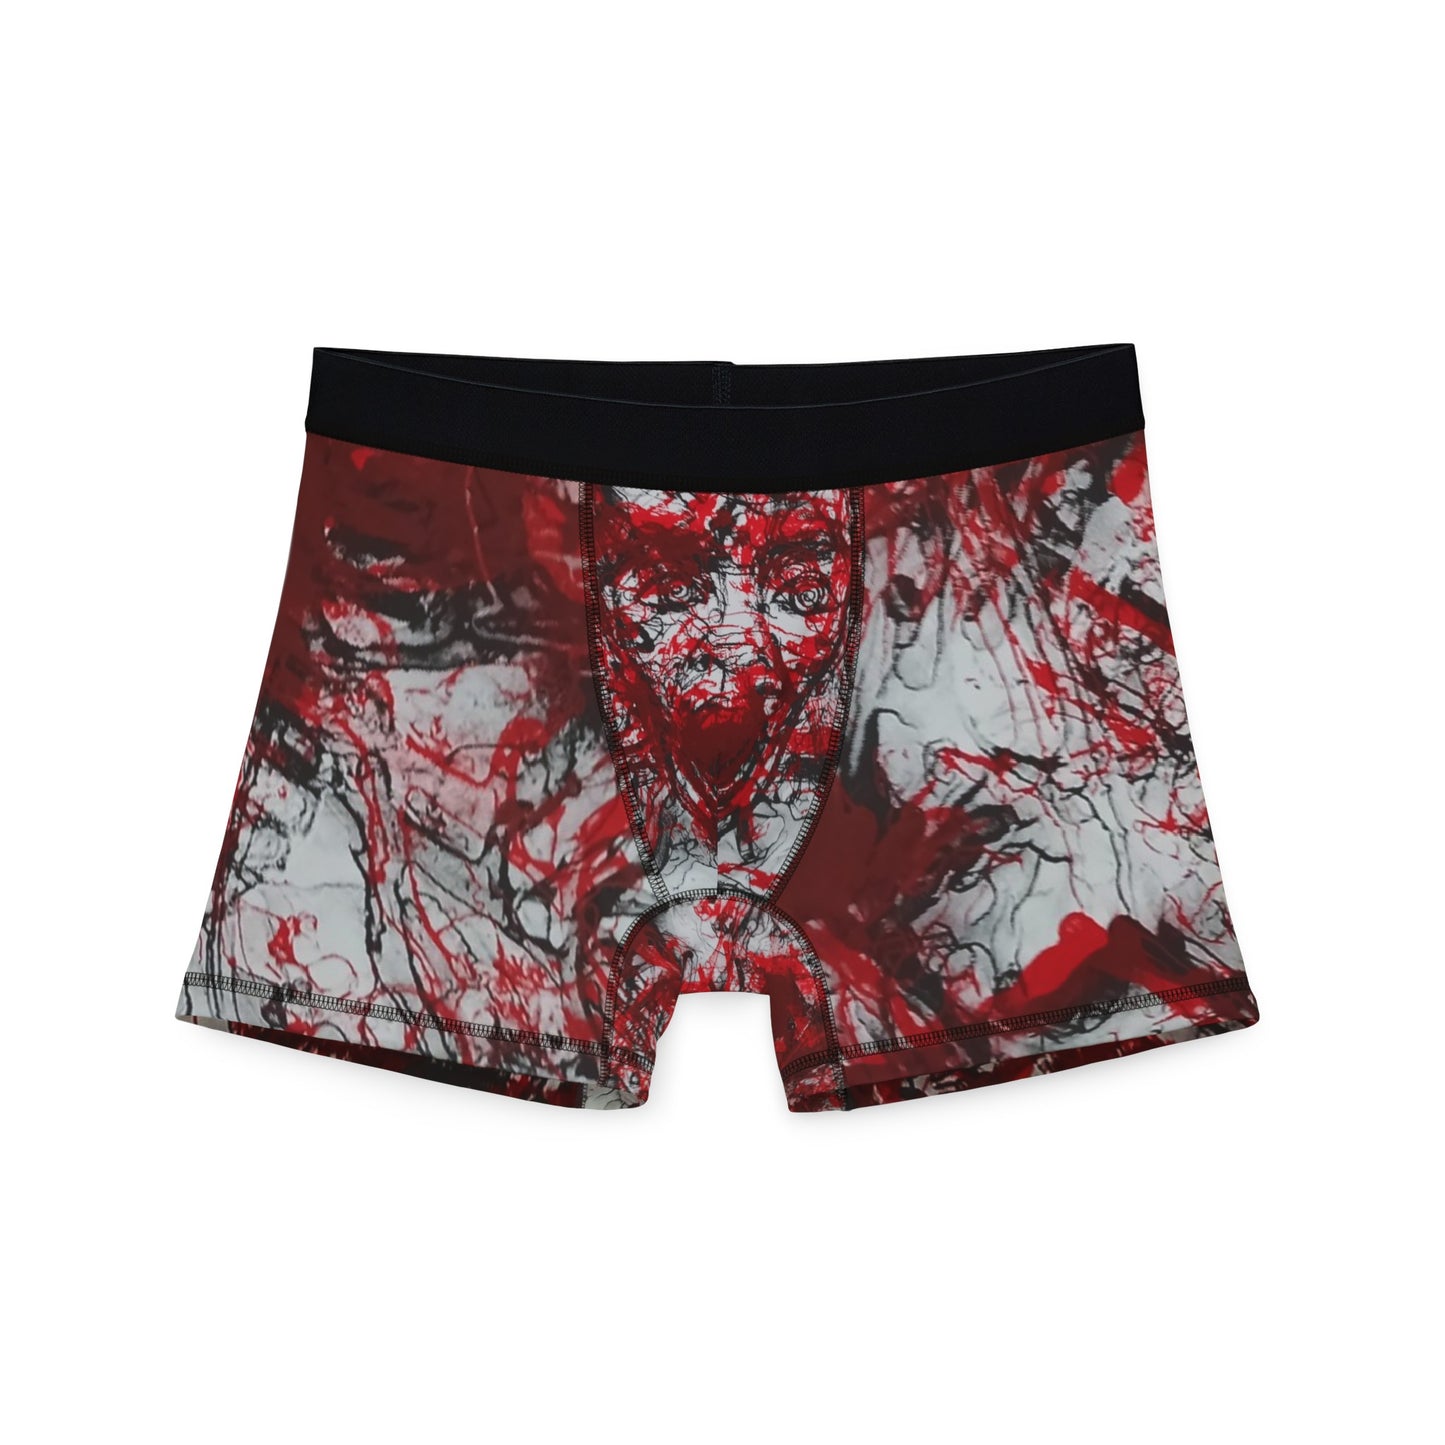 "The Scream" Boxers - Red